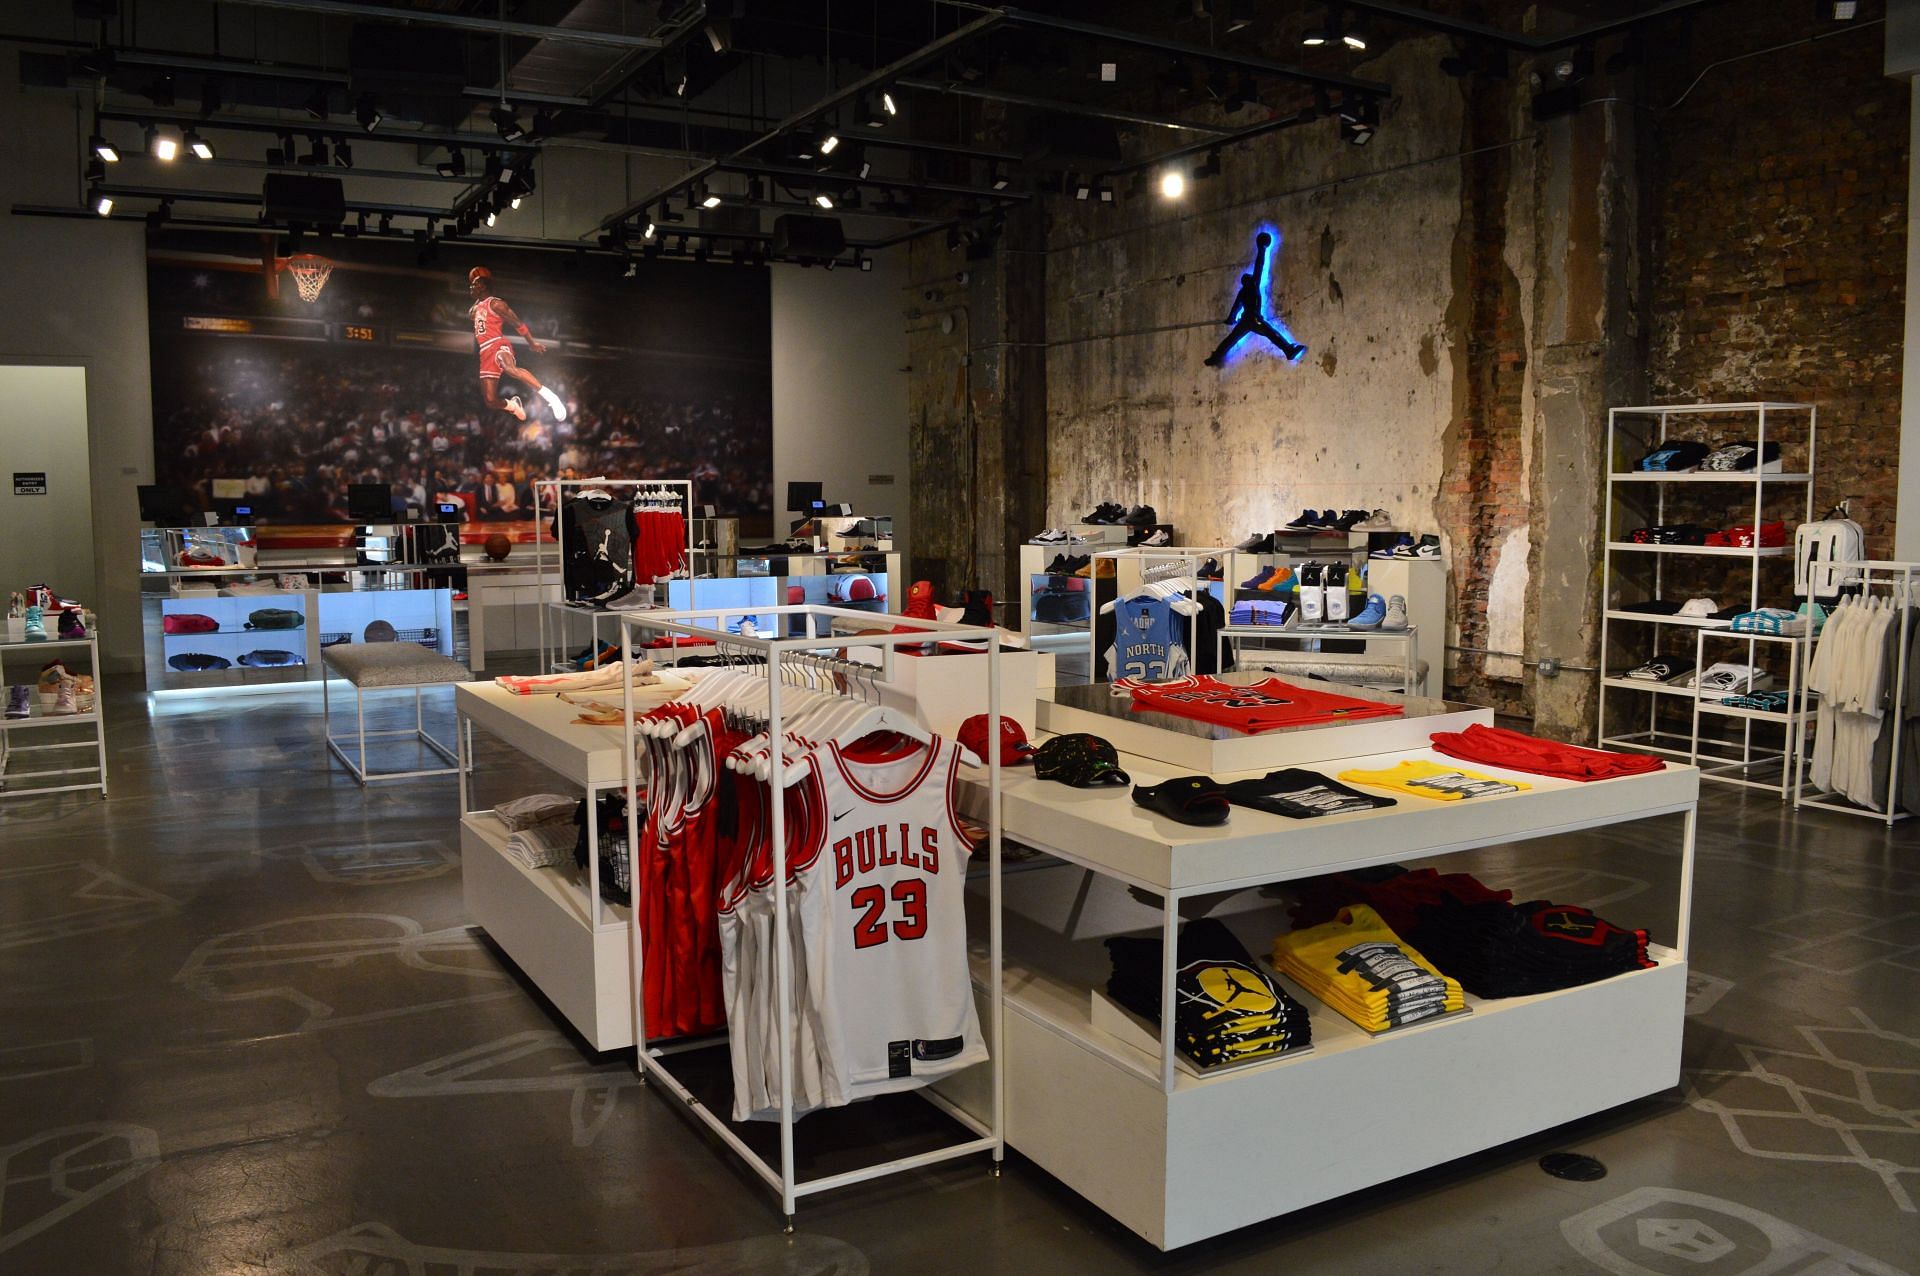 Jordan store - Jerseys, Shoes, and more